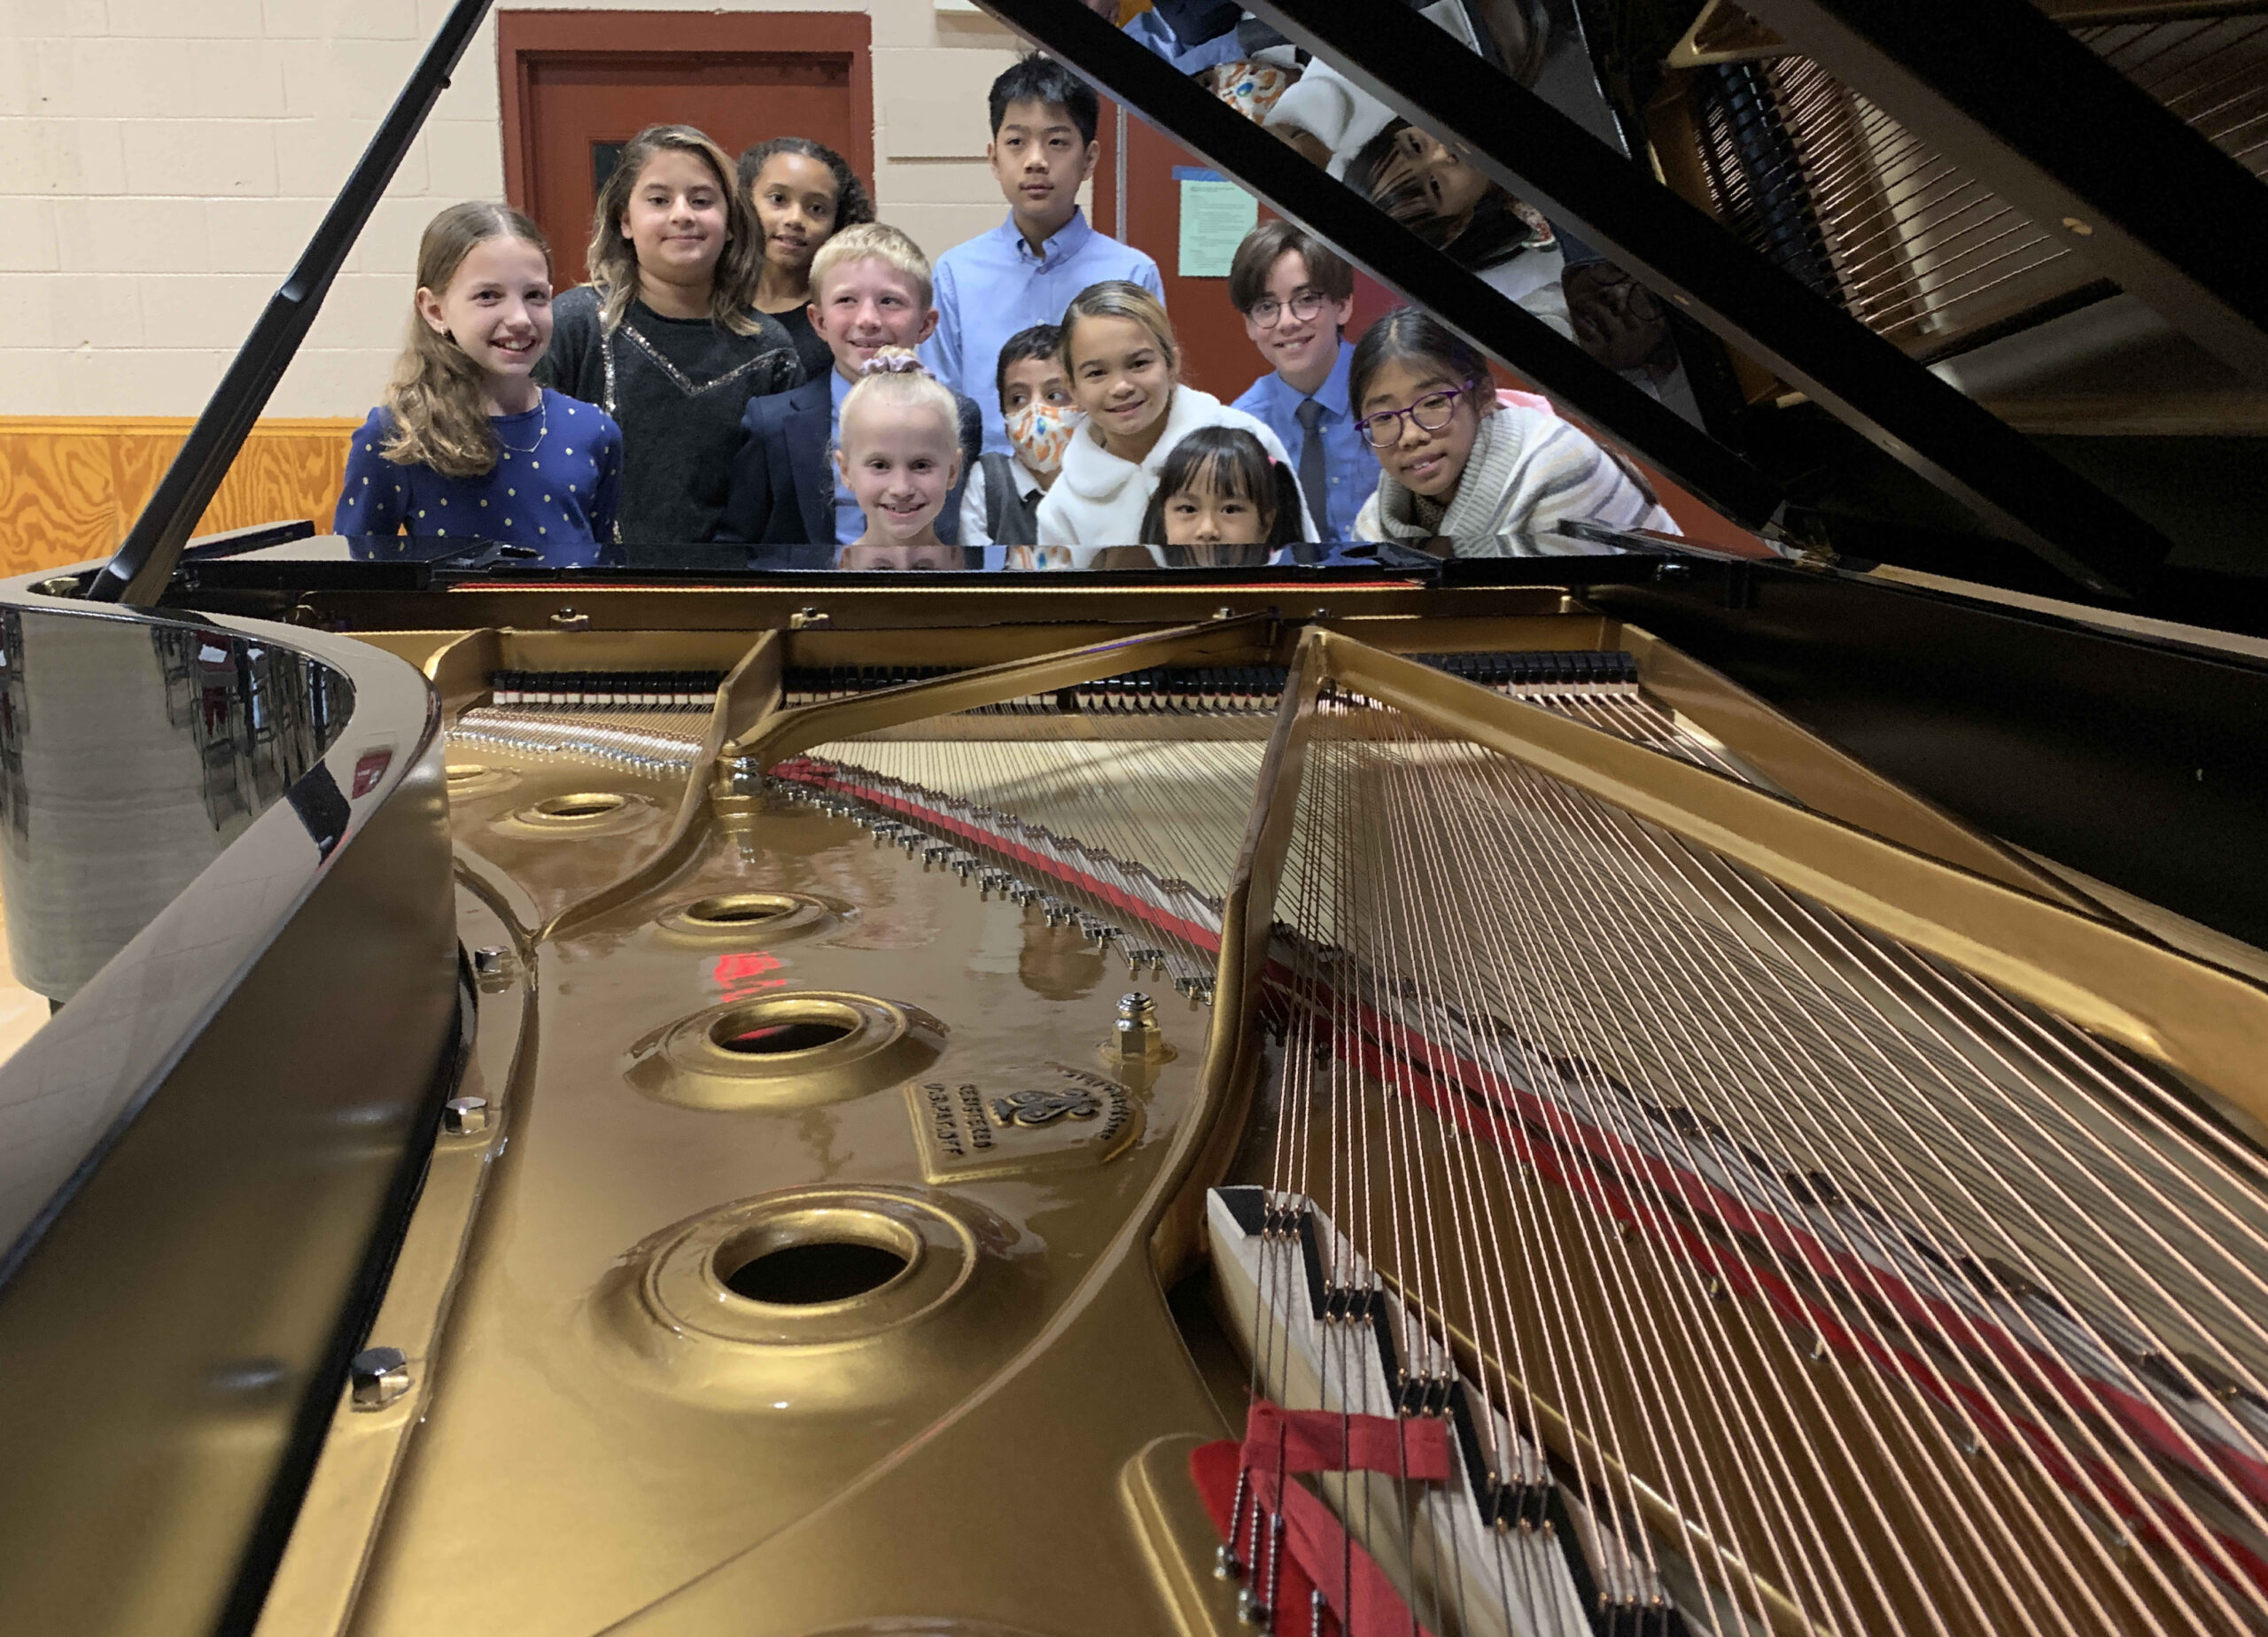 Children looking over strings of grand piano